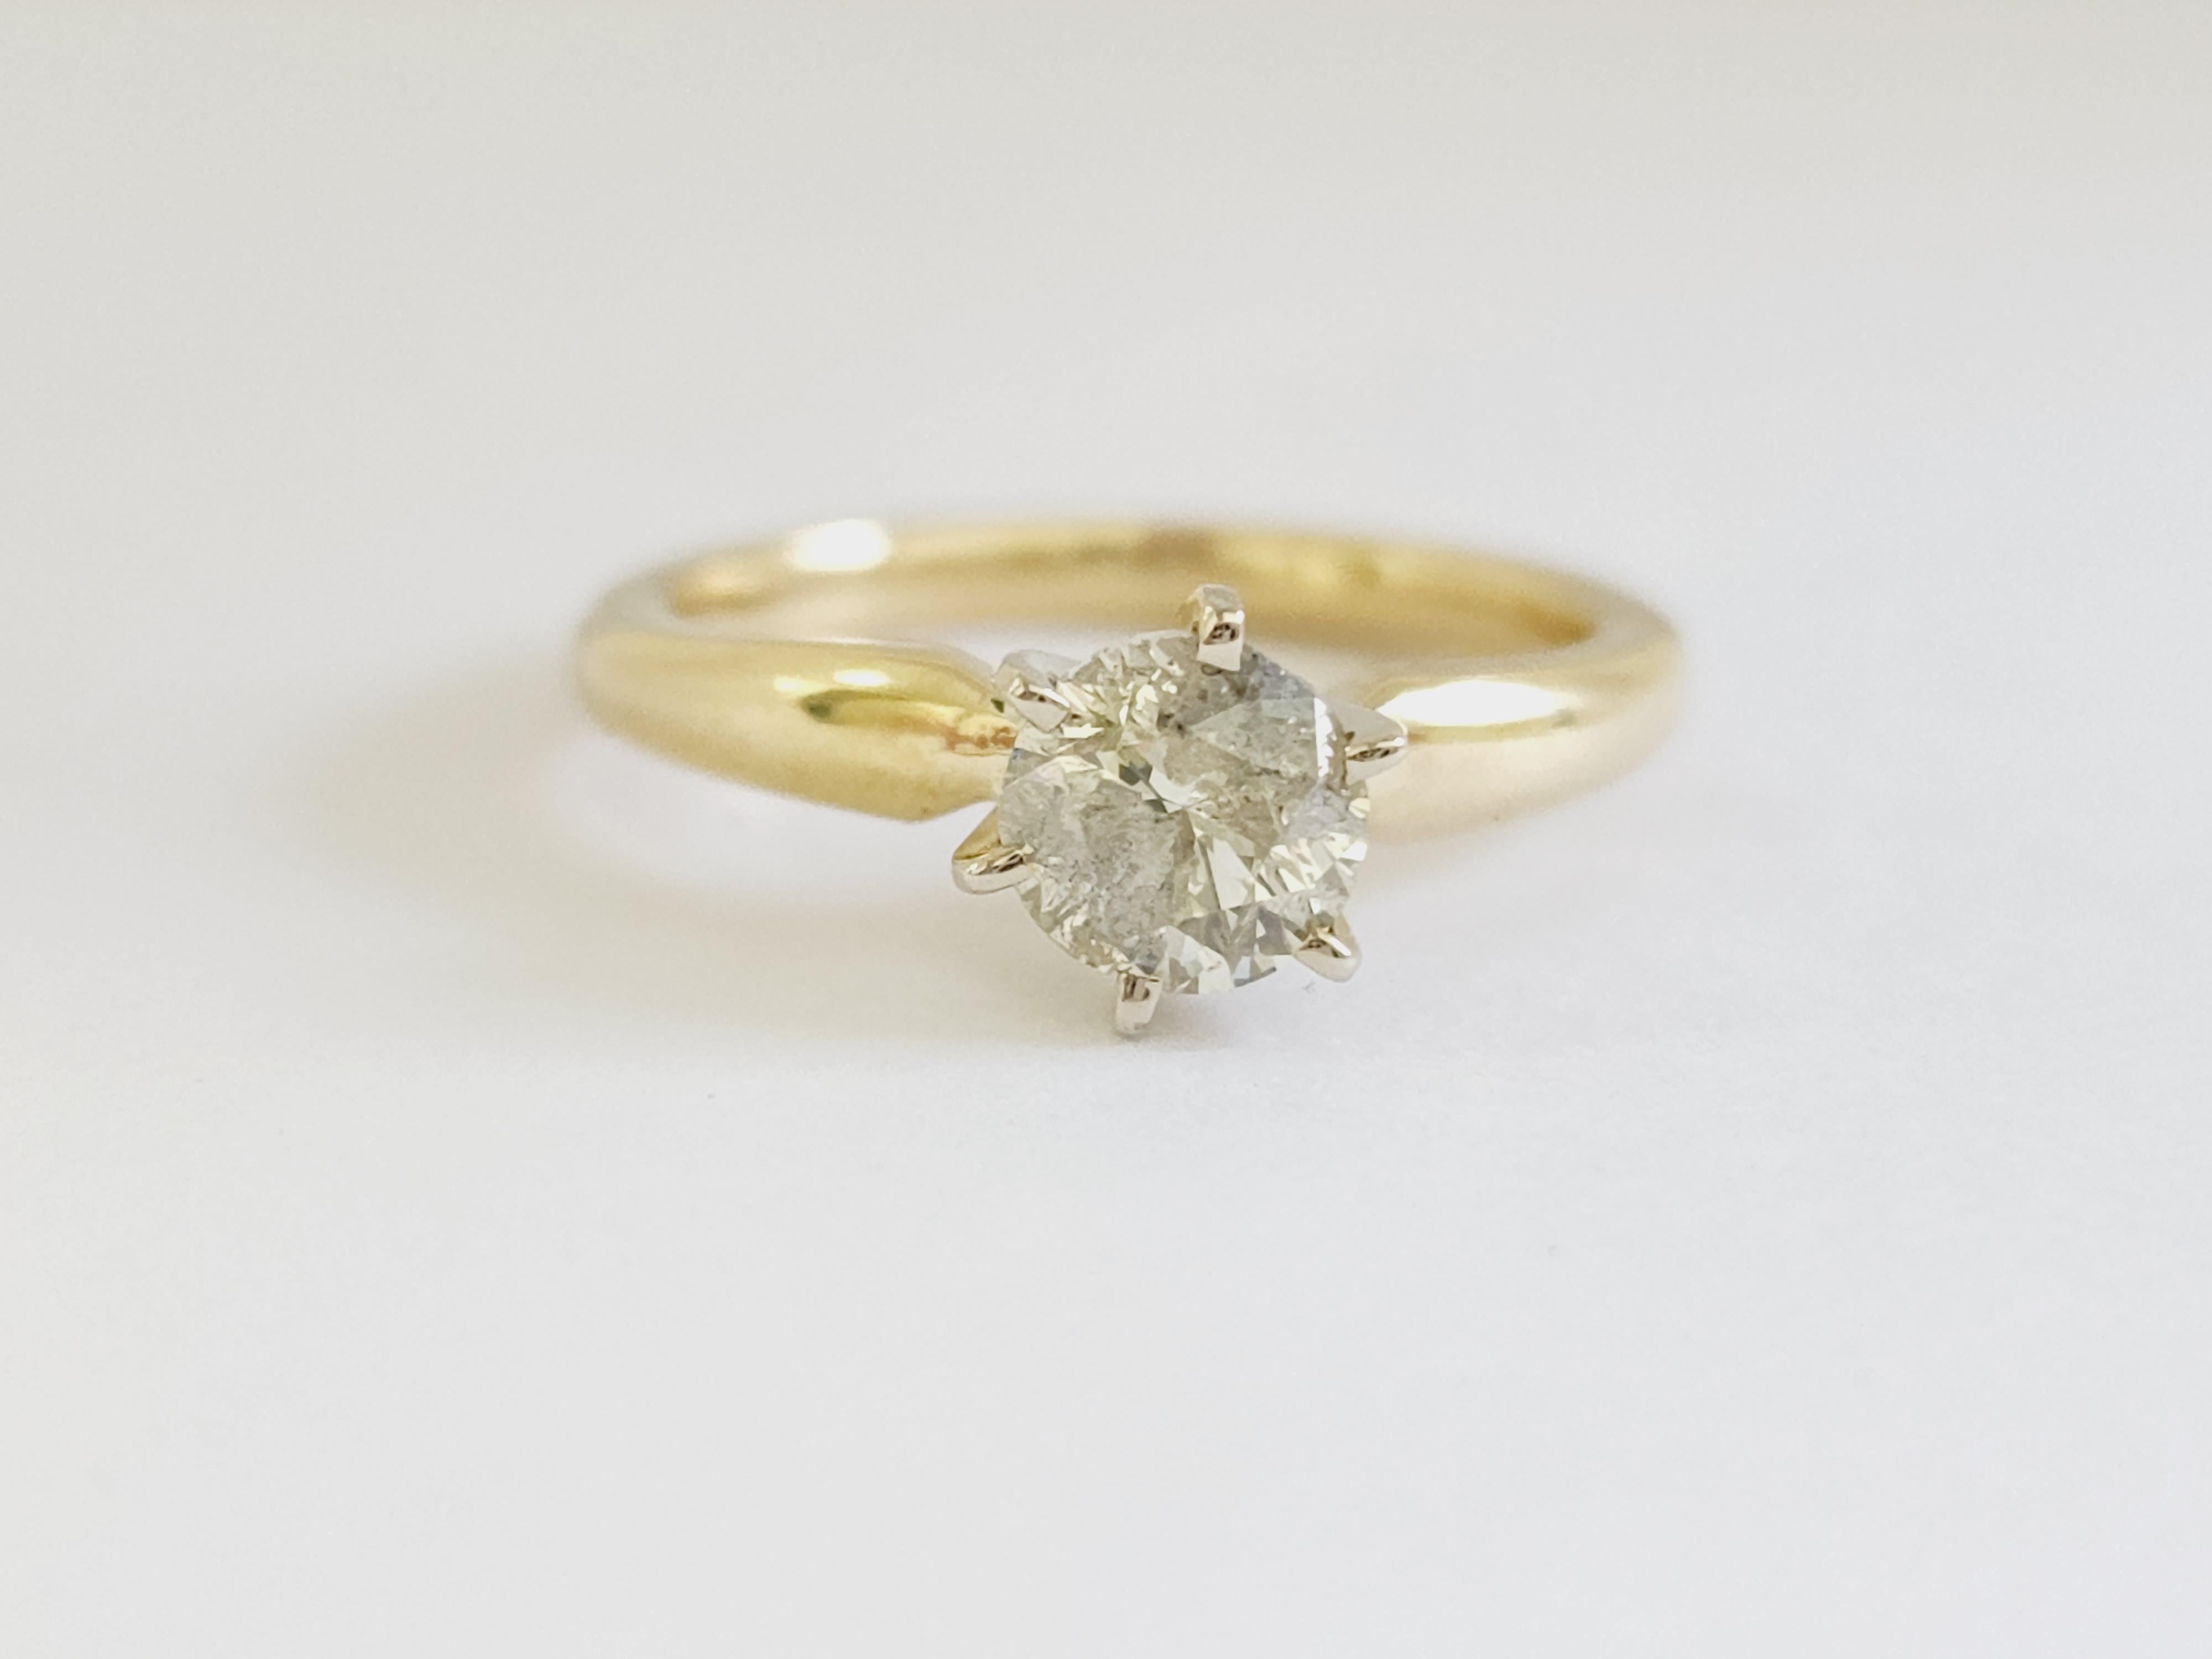 GIA 1.01 ct round brilliant cut natural diamonds. 6 prong solitaire setting, set in 14k yellow gold. Ring Size 7